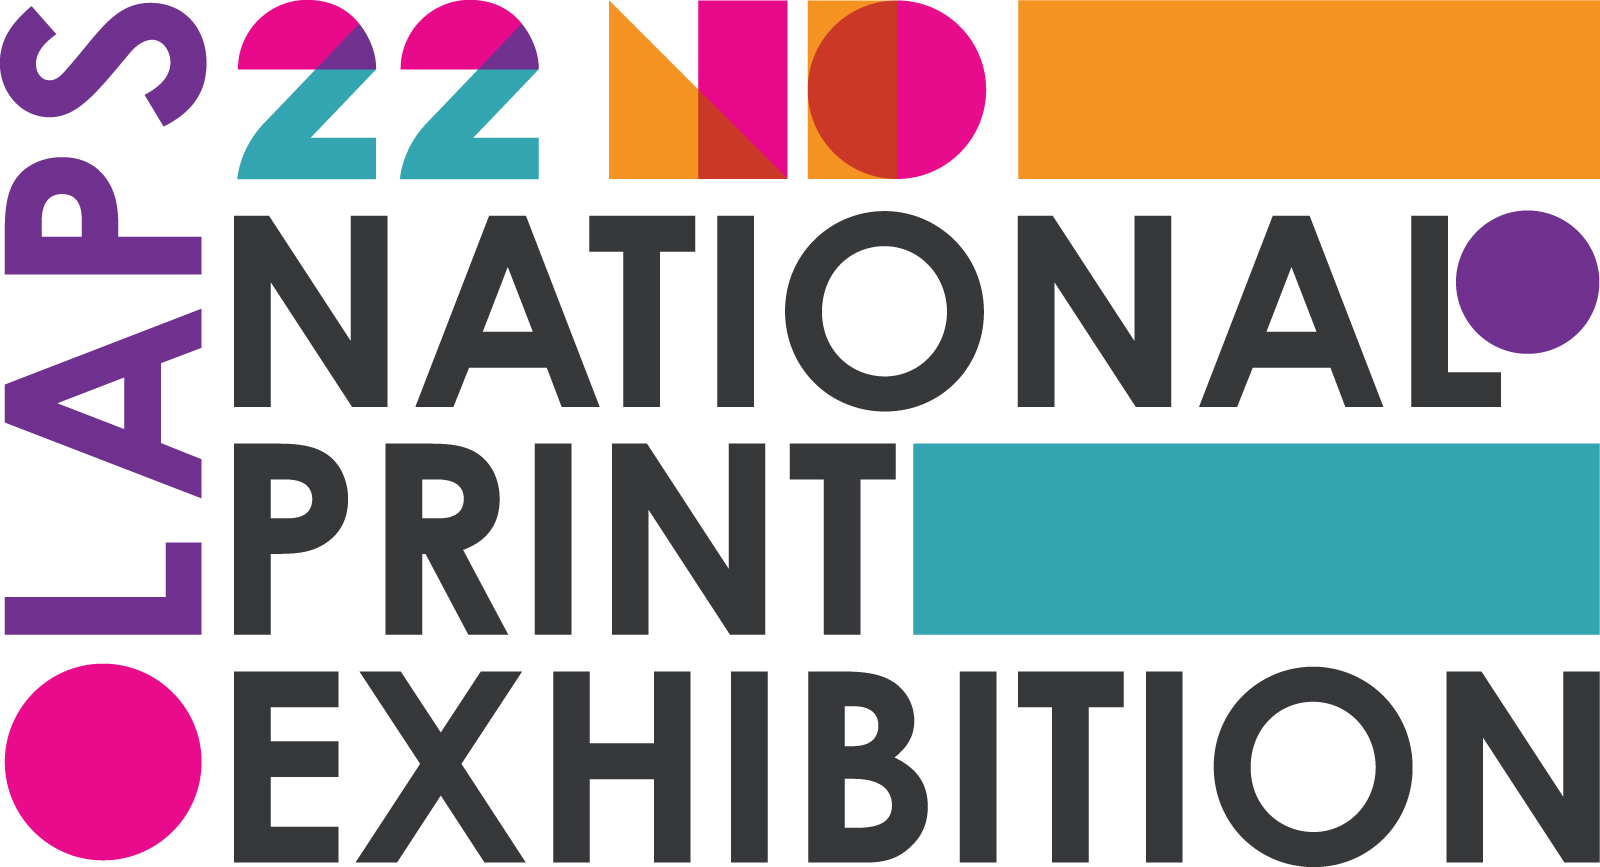 LAPS 22nd National Print Exhibtion